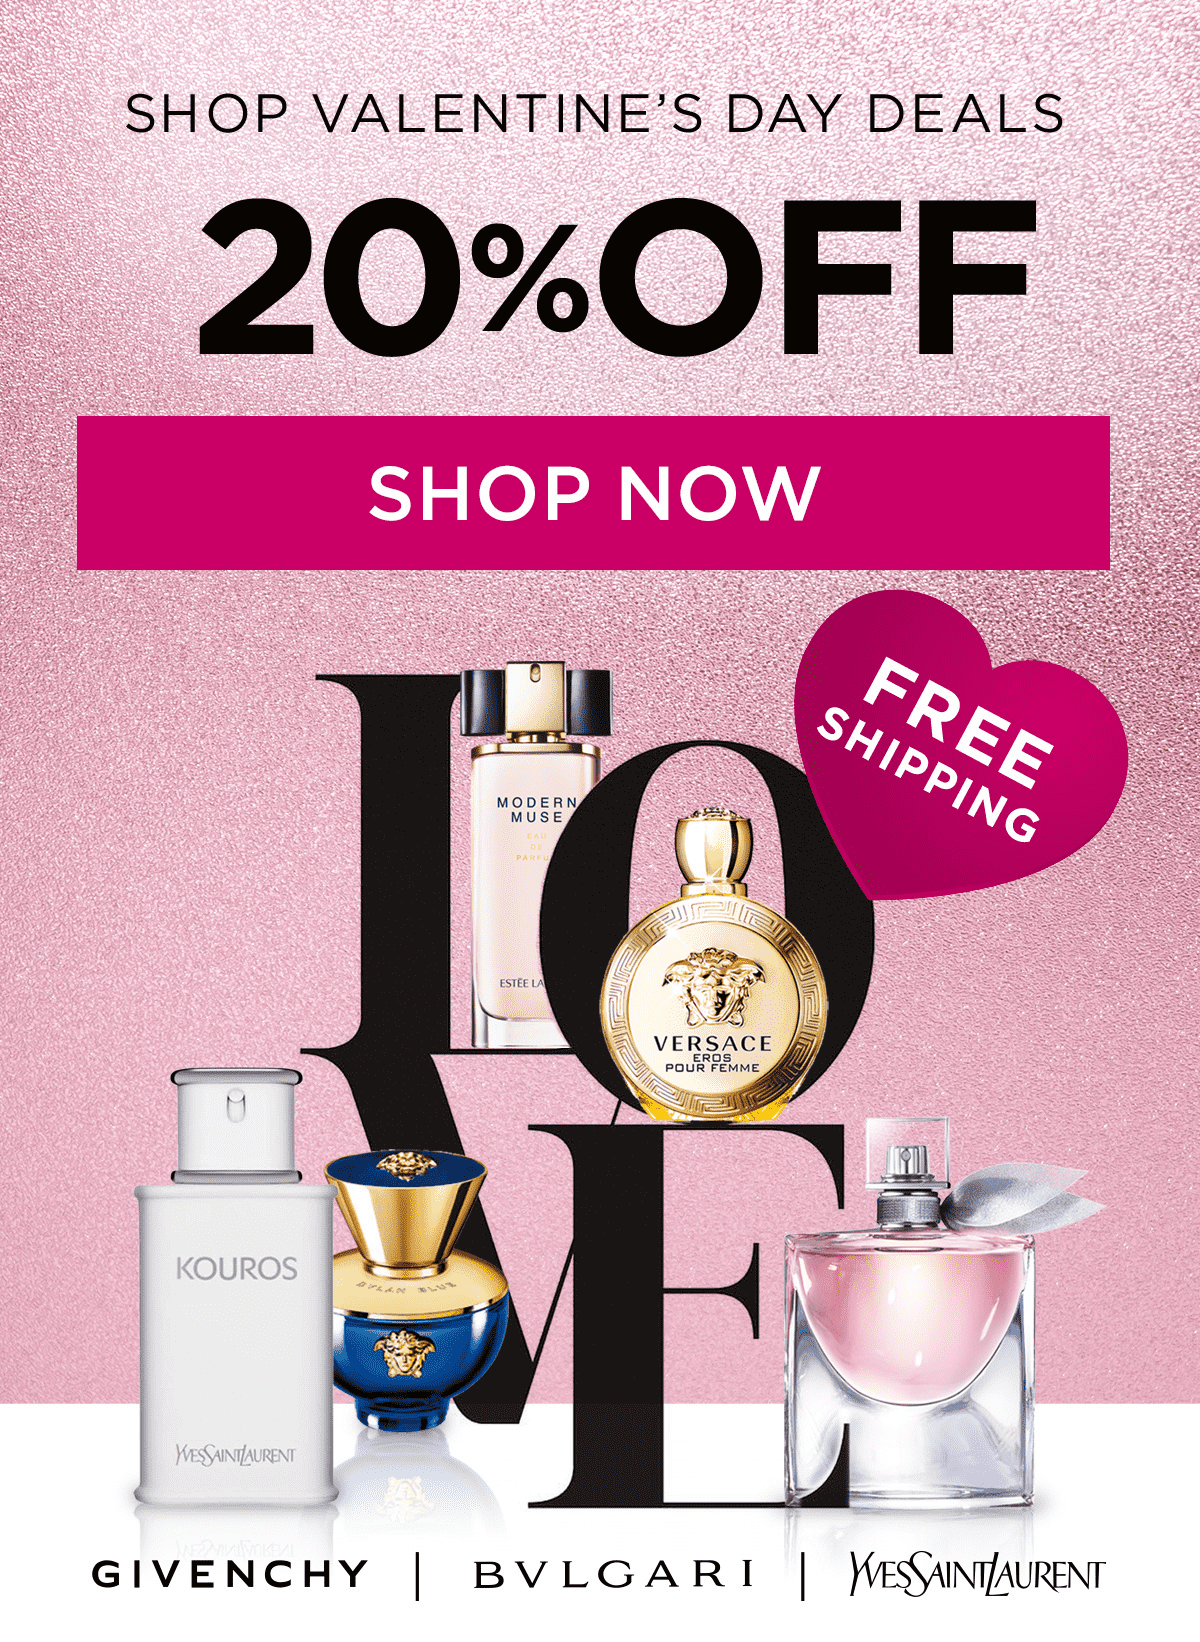 Shop Valentine's Day Deals | 20% OFF | FREE SHIPPING